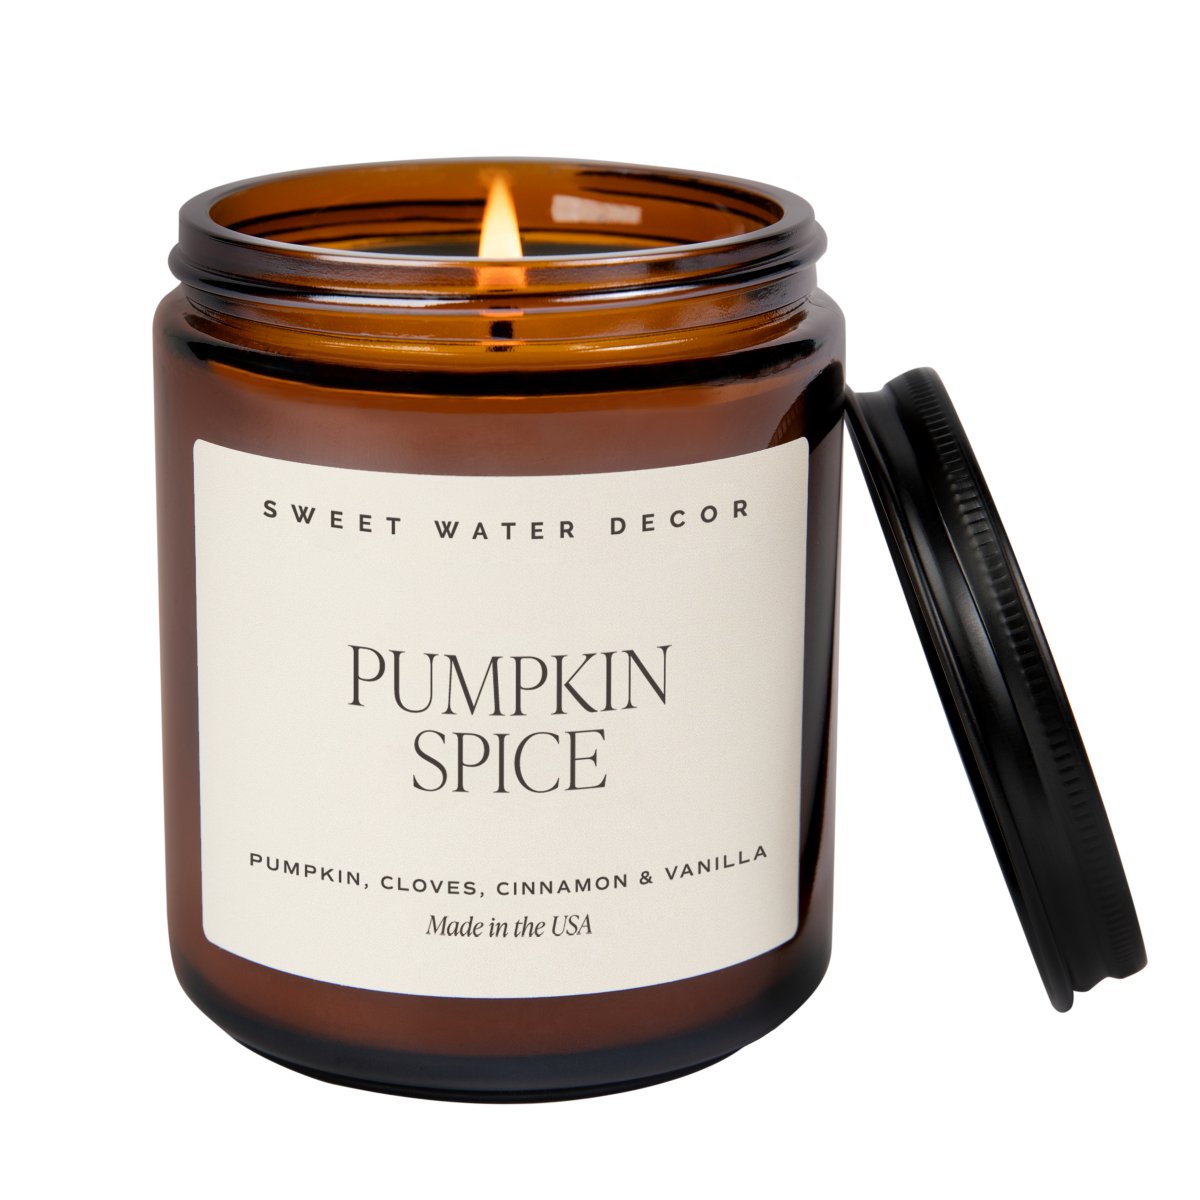 Sweet Water Decor Pumpkin Spice Soy Candle - Amber Jar - 9 oz - lily & onyx